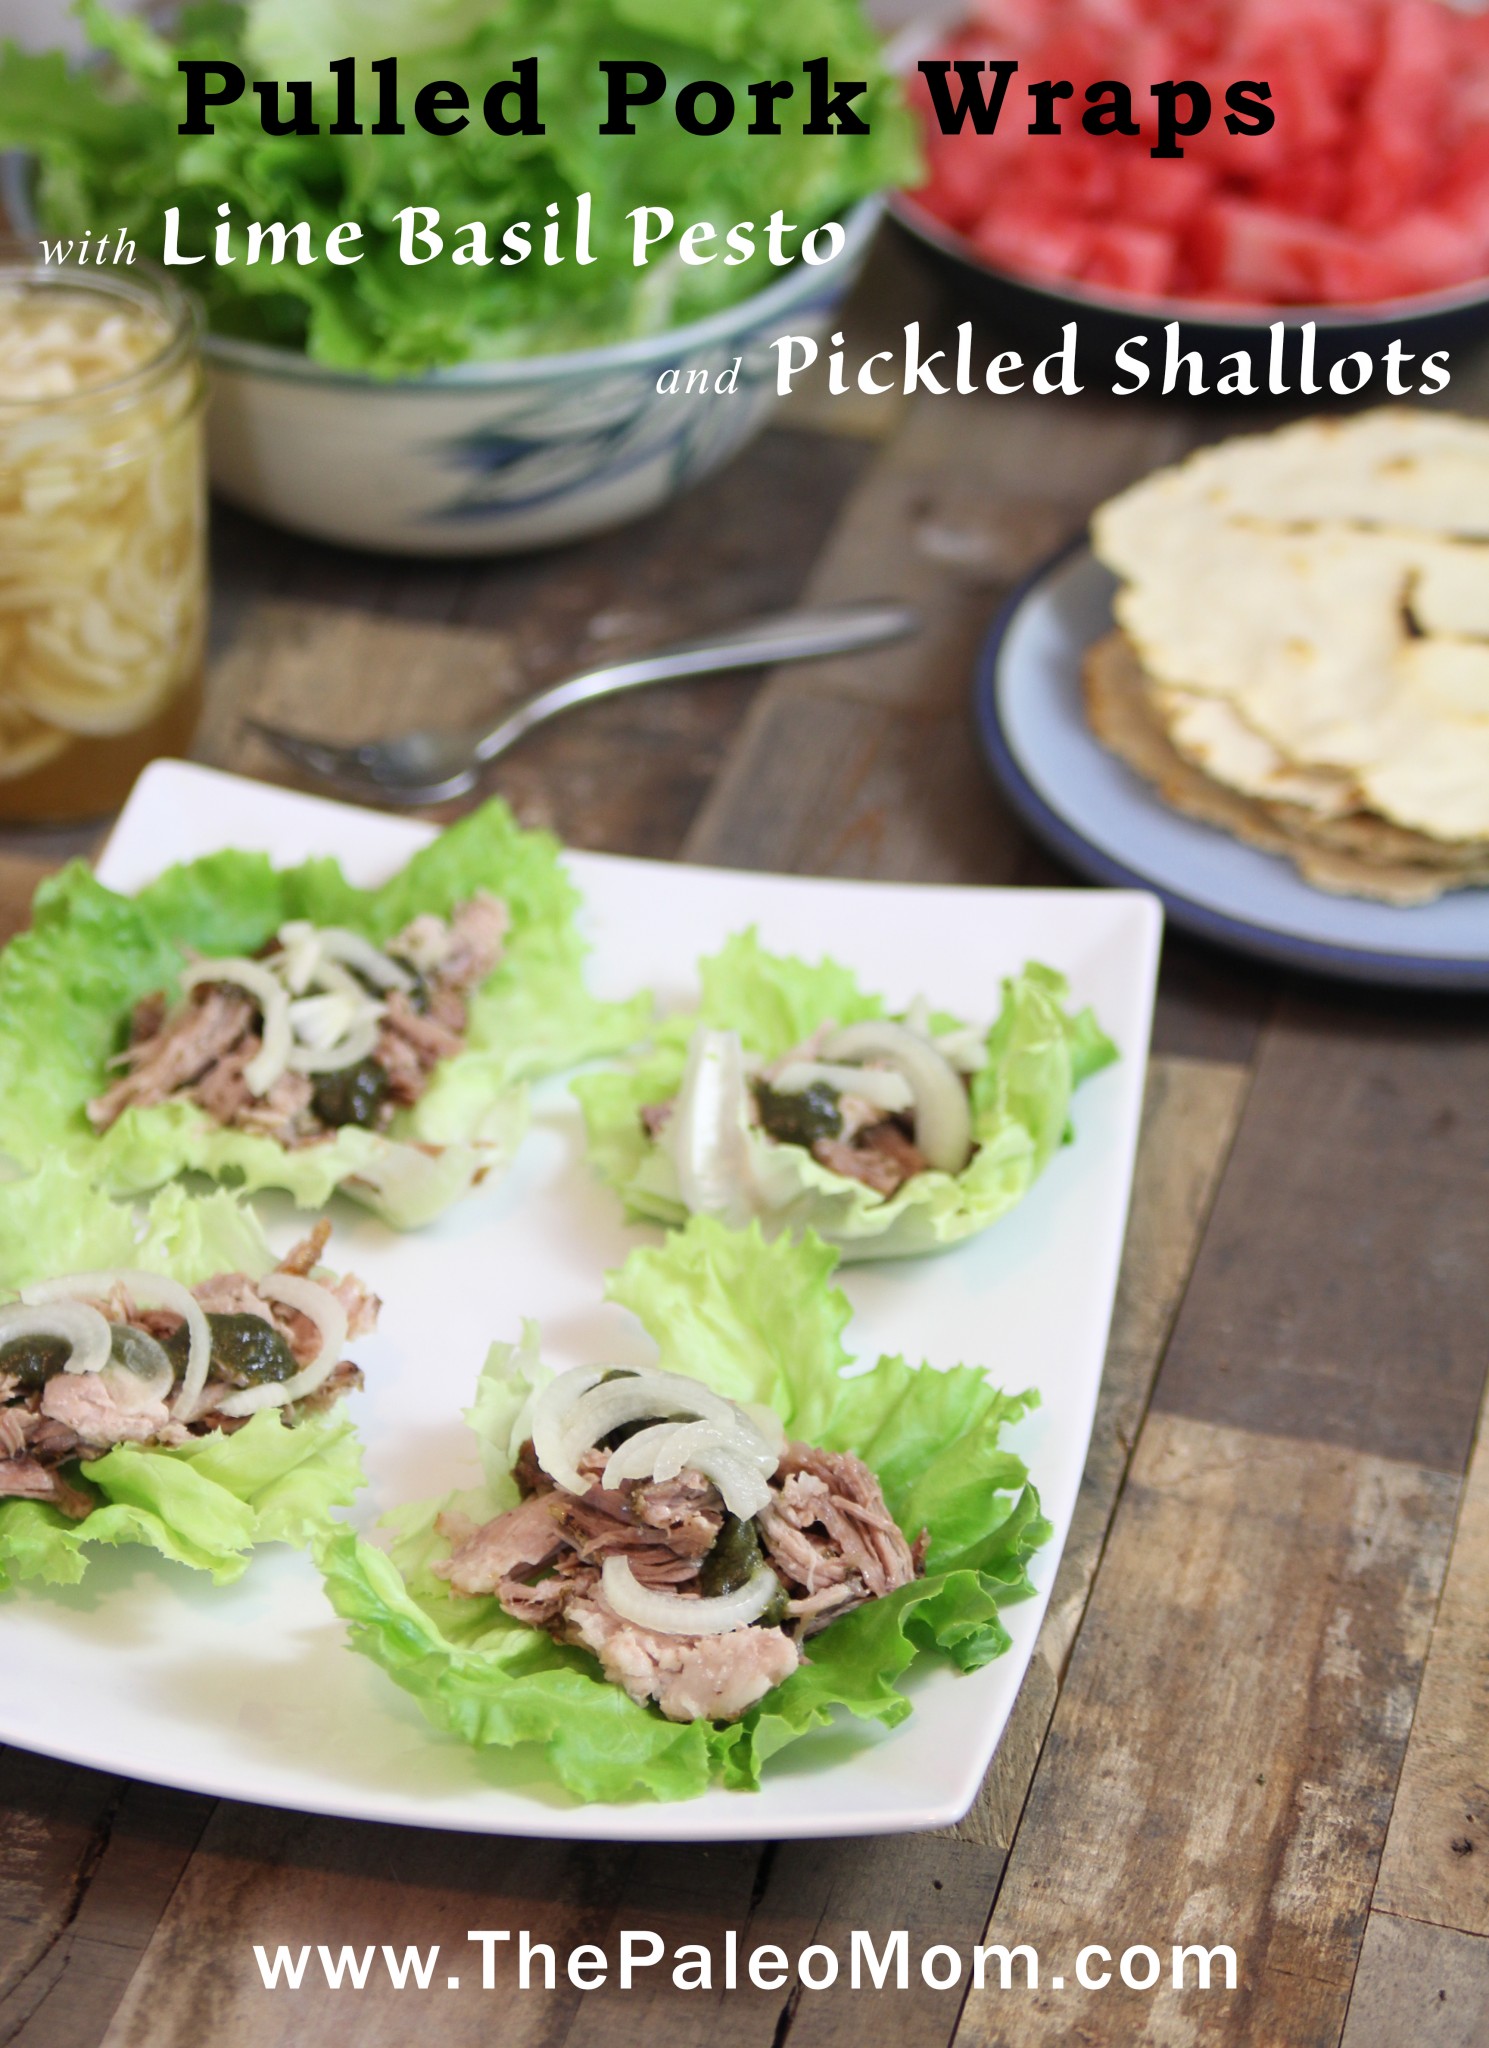 Pulled Pork Wraps with Lime Basil Pesto and Pickled Shallots